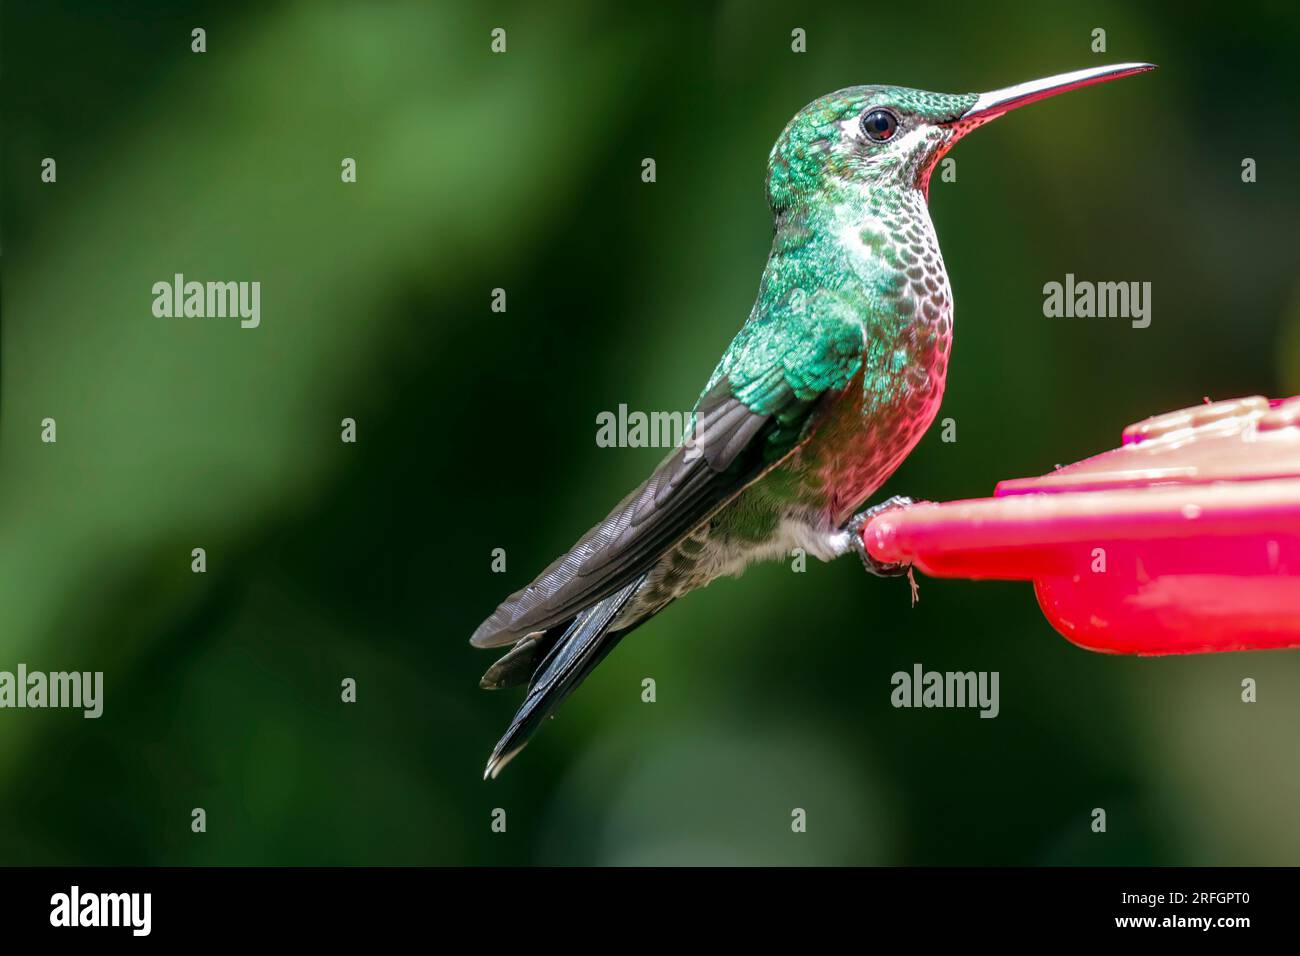 An adult female Brilliant Green Crowned Hummingbird at a feeder in the Monteverde Cloud Forest in Costa Rica. Stock Photo